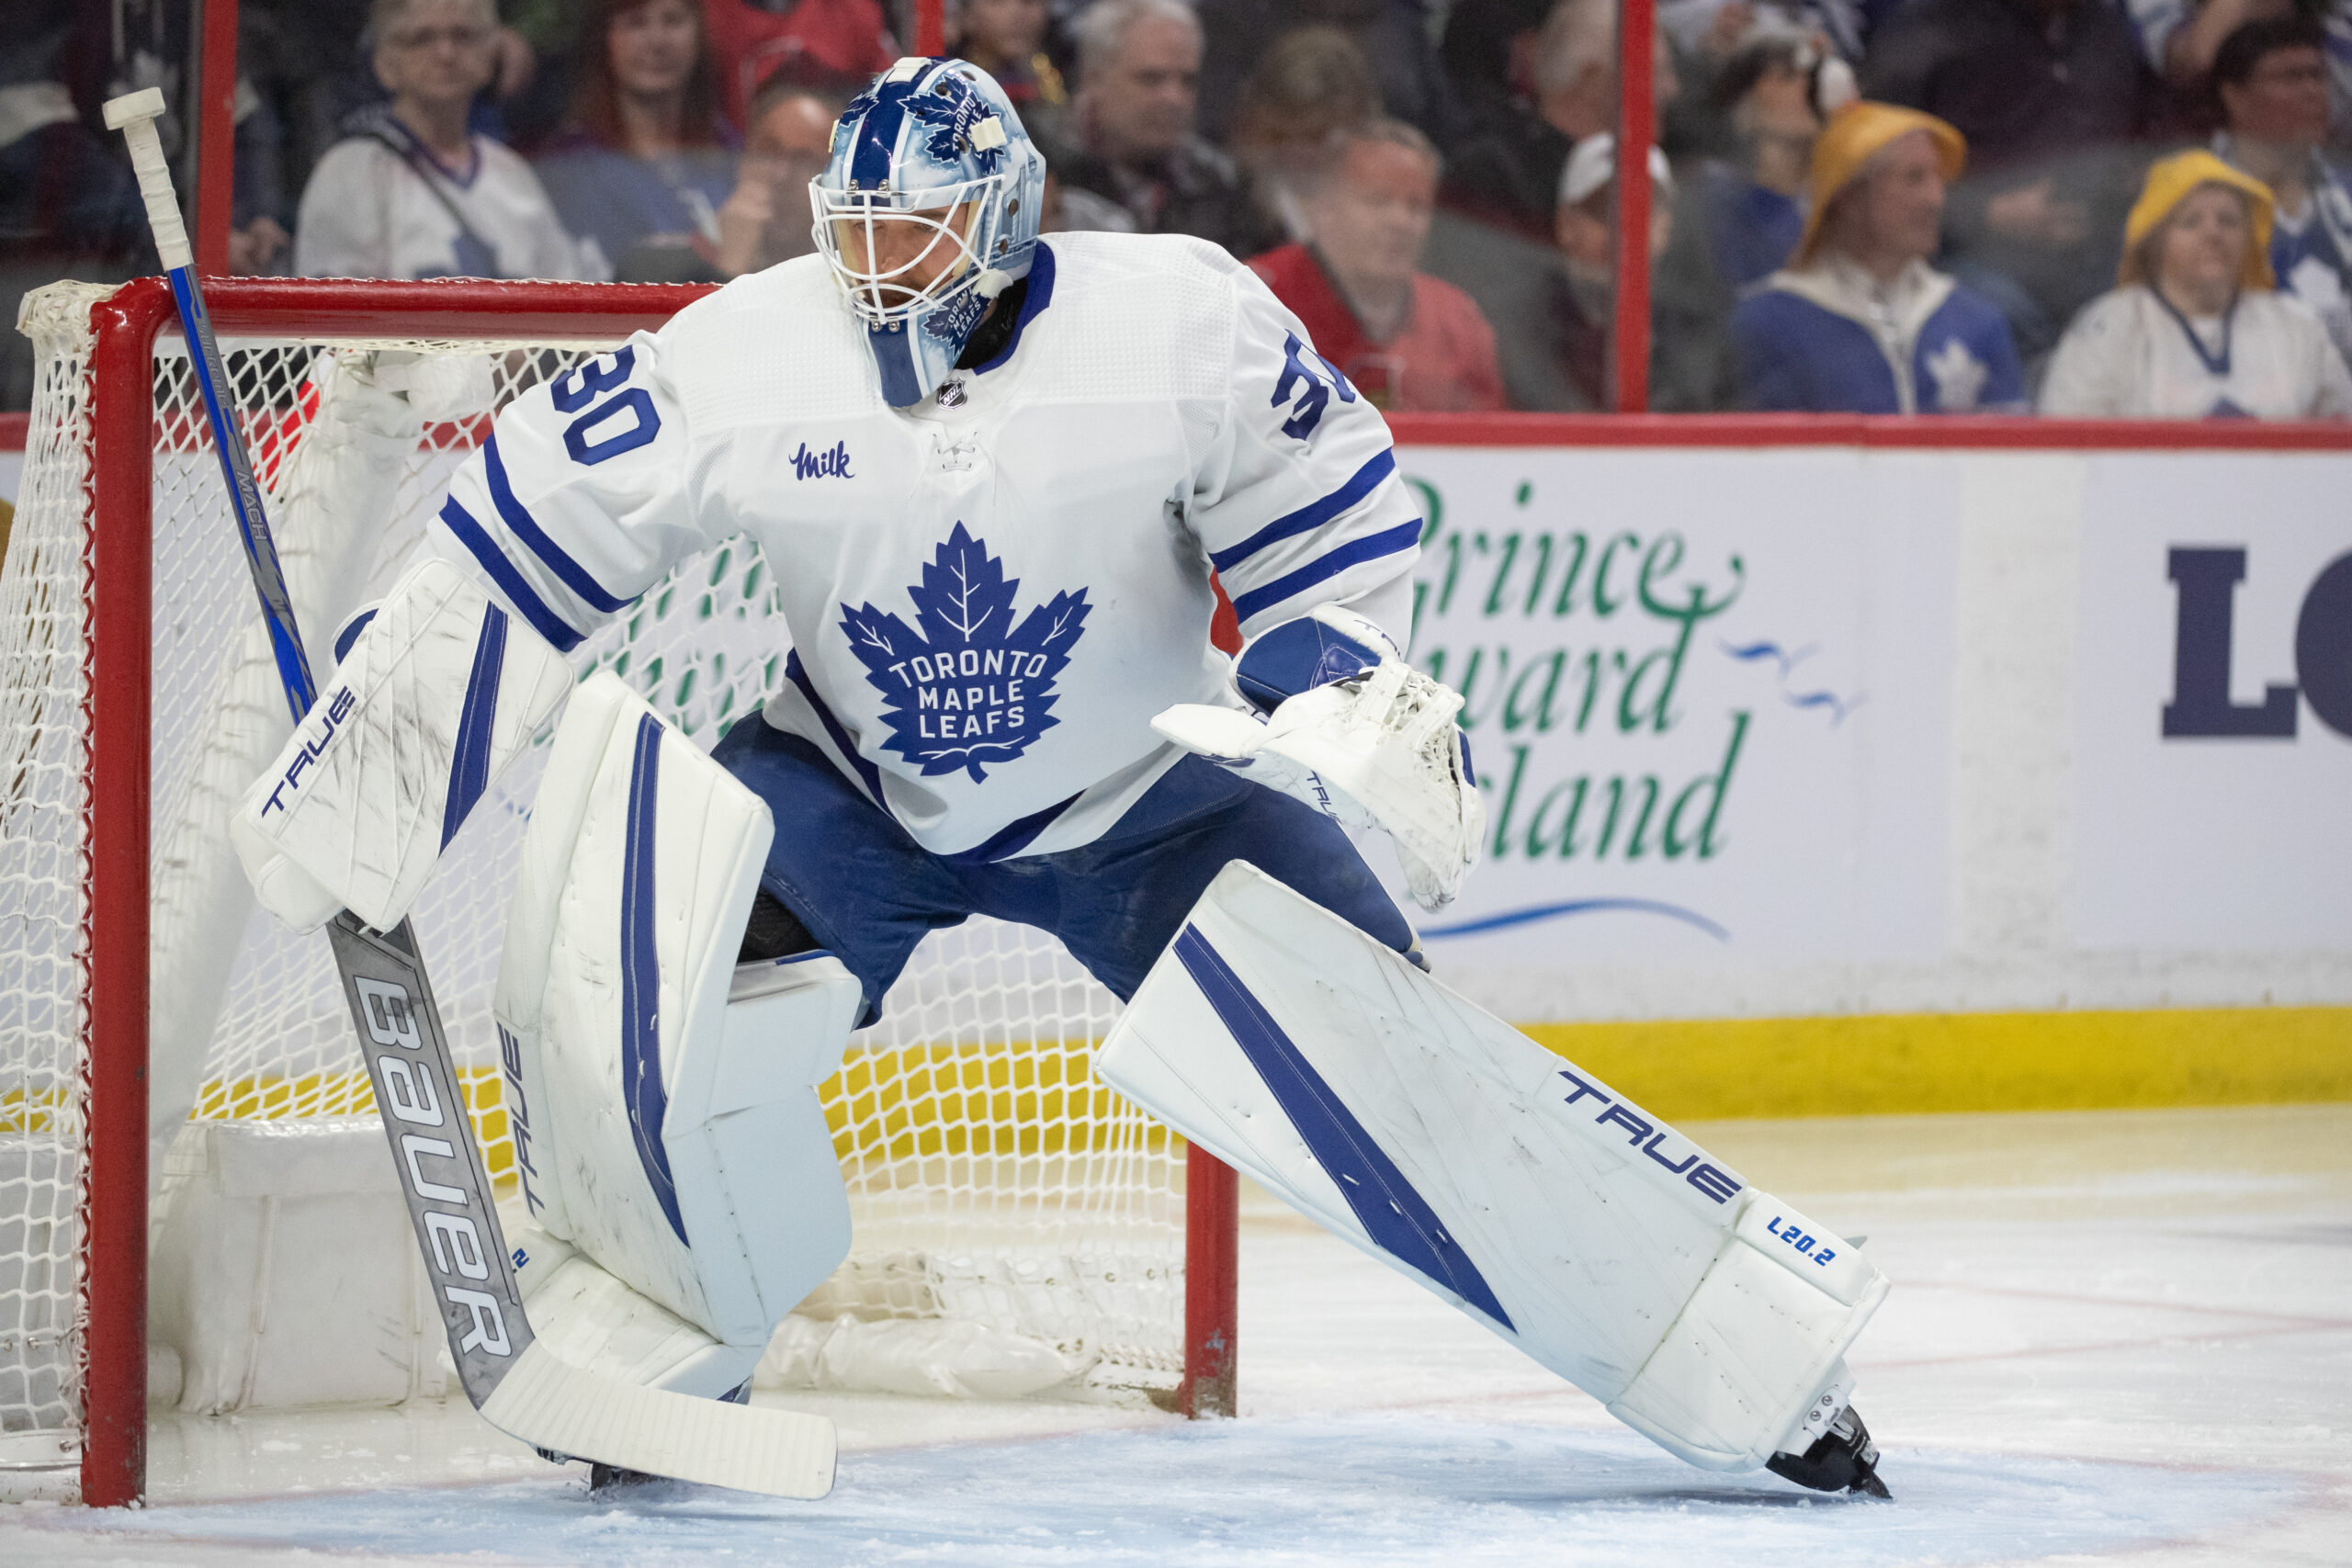 Major Decisions Ahead With Maple Leafs Way Over Salary Cap